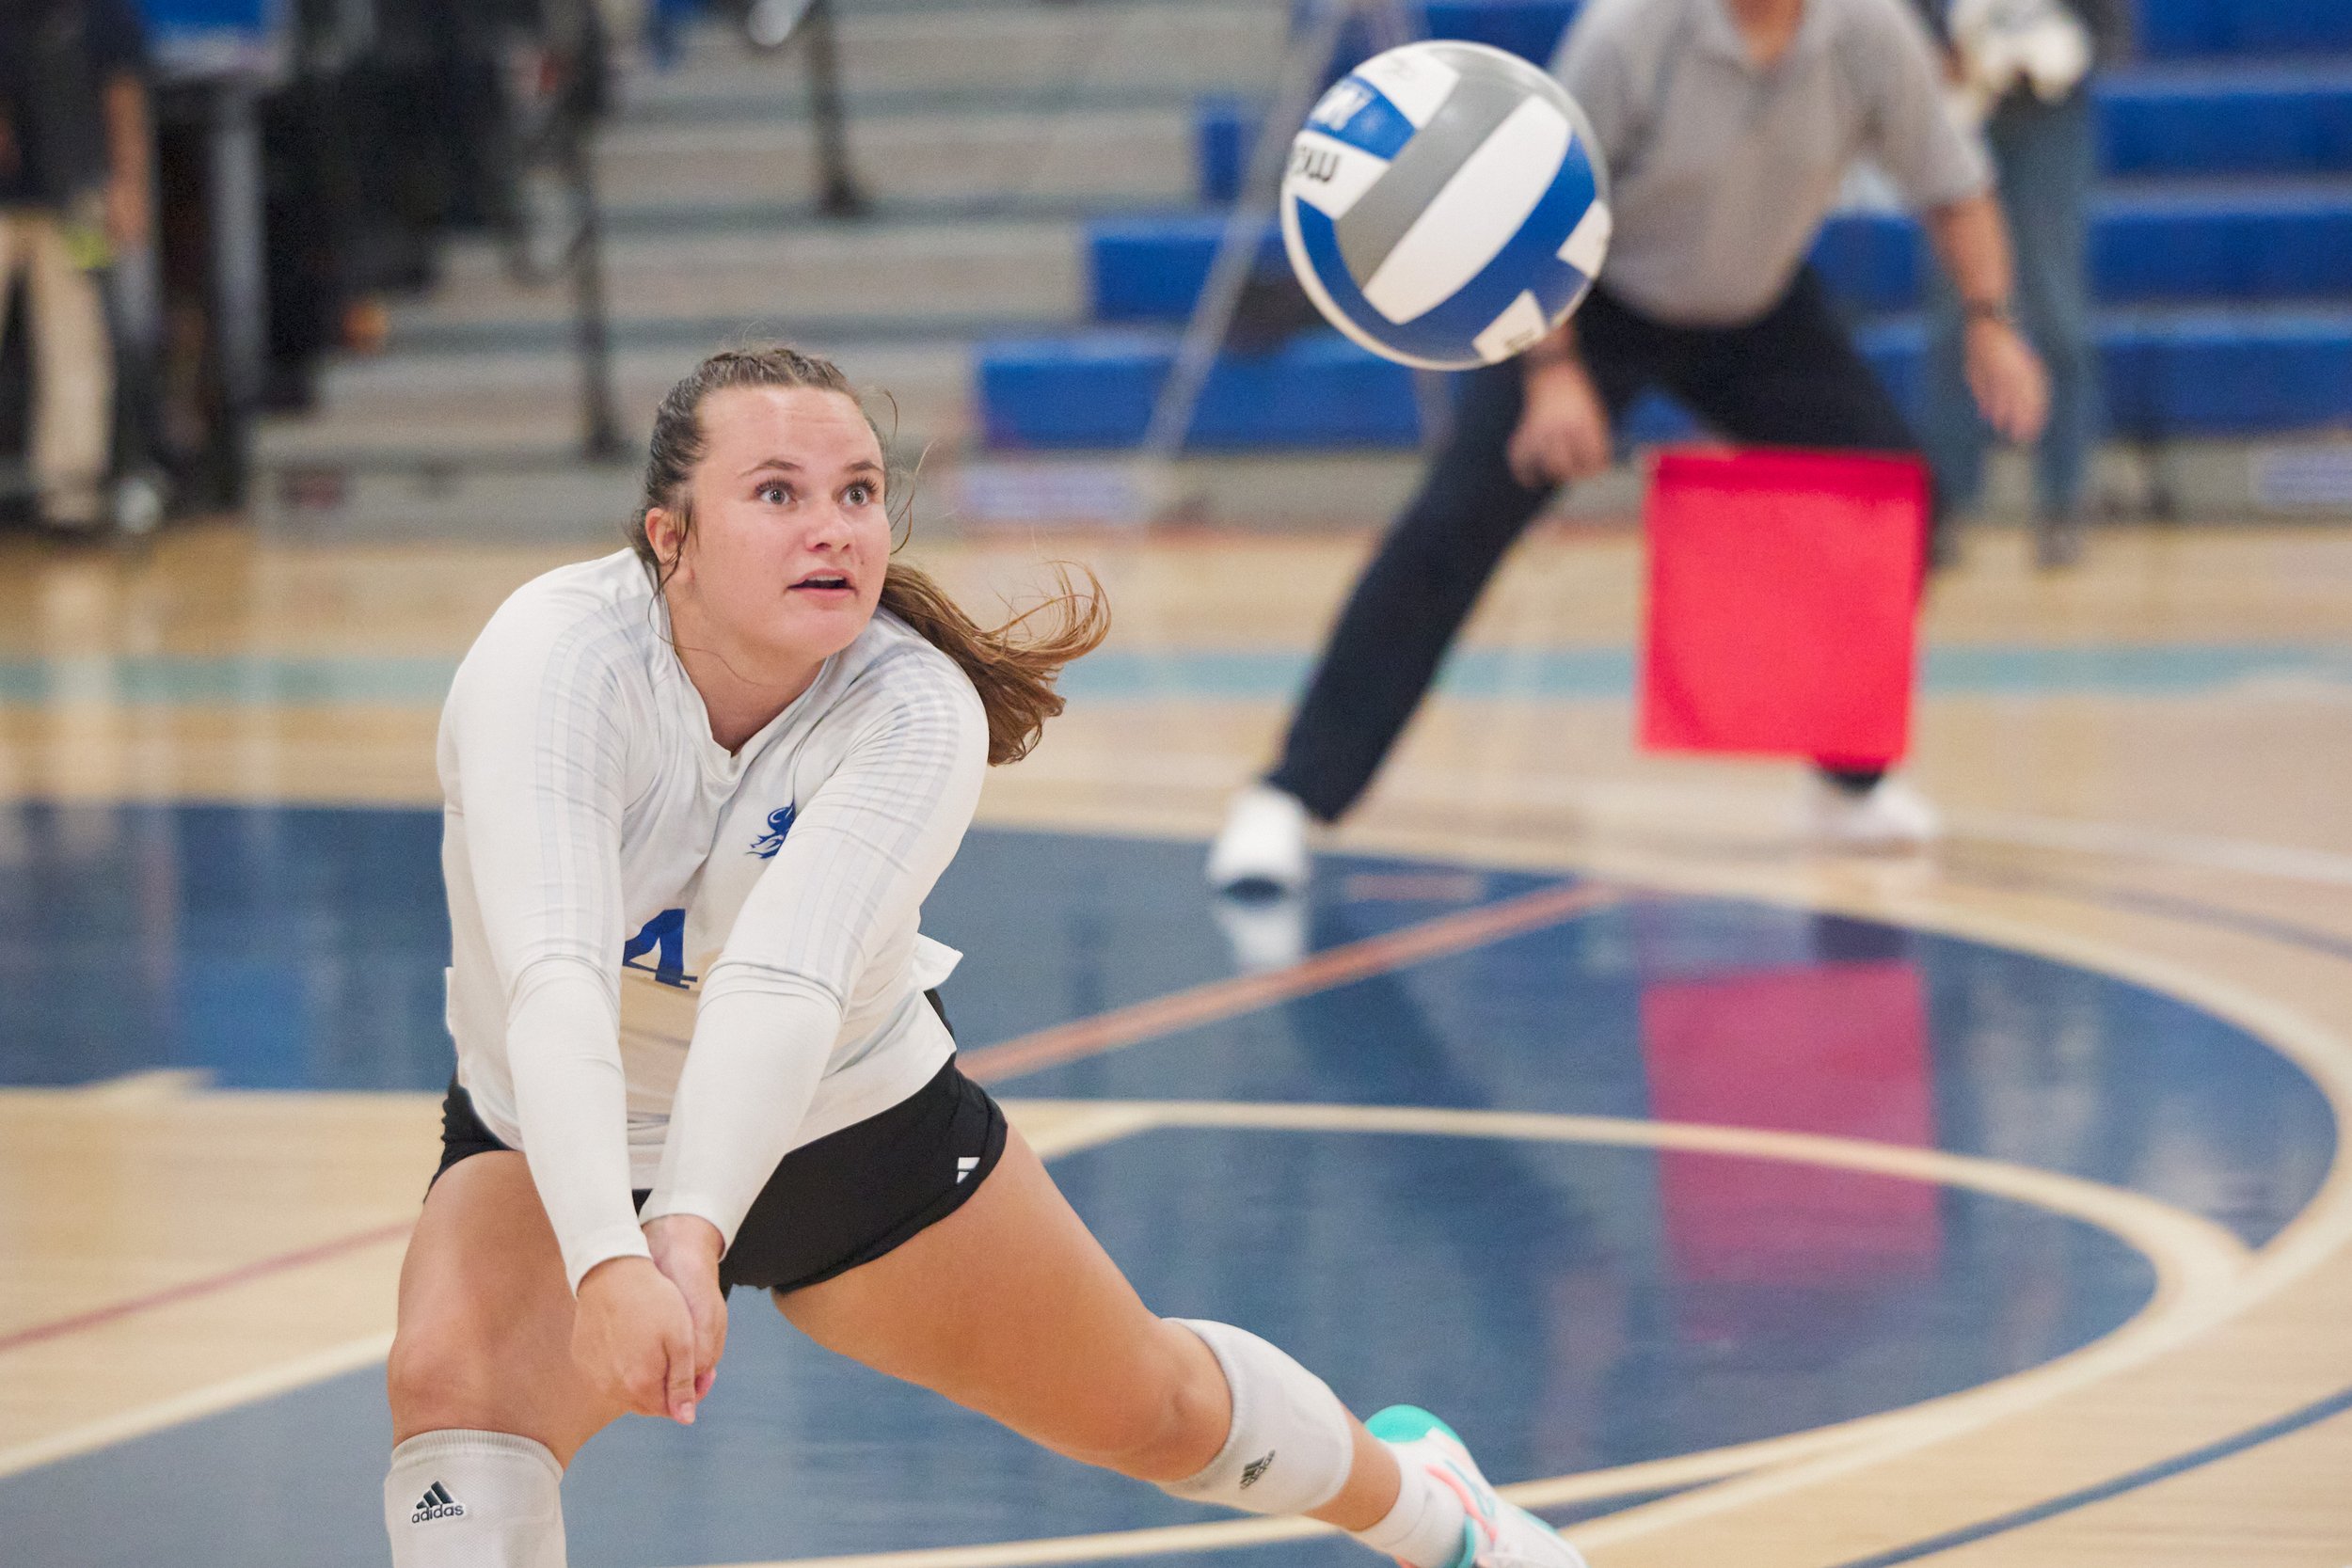  Santa Monica College Corsairs' Bridget Robarts prepares to hit the ball during the women's volleyball match against the Santa Barbara City College Vaqueros on Wednesday, Sept. 20, 2023, at Corsair Gym in Santa Monica, Calif. The Corsairs won 3-2. (N